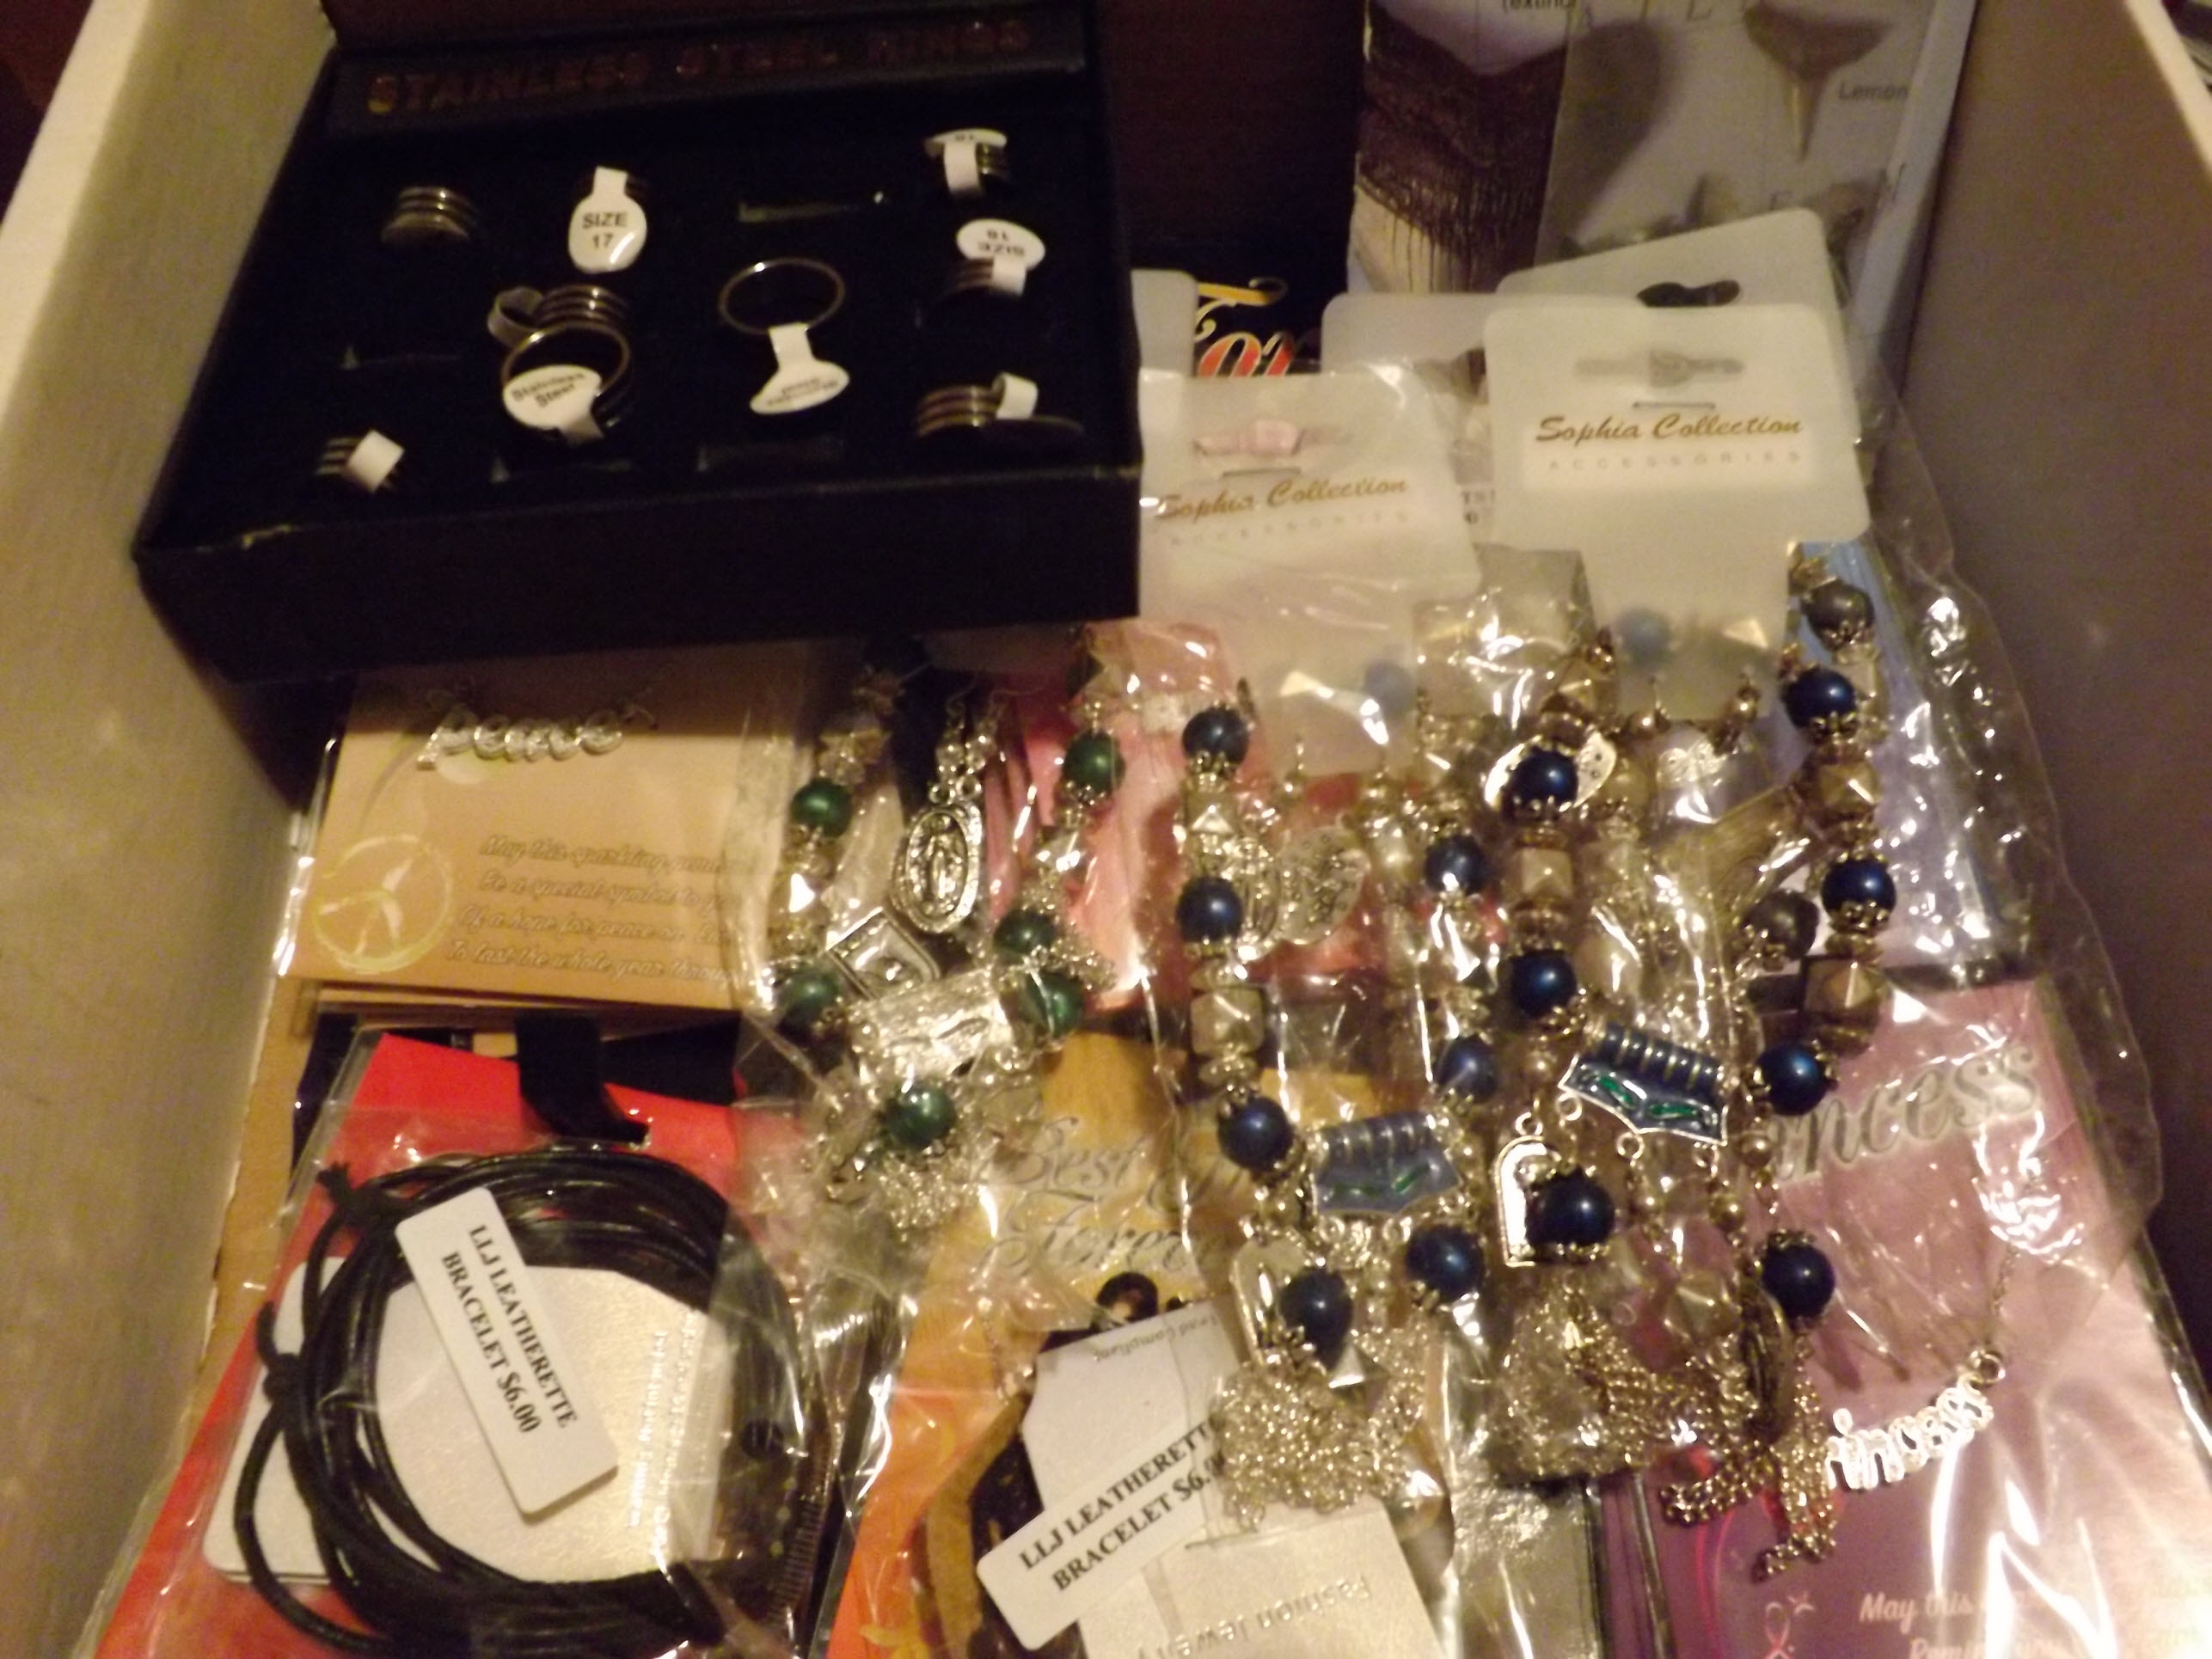 Over 35 pieces of new Costume Jewelry